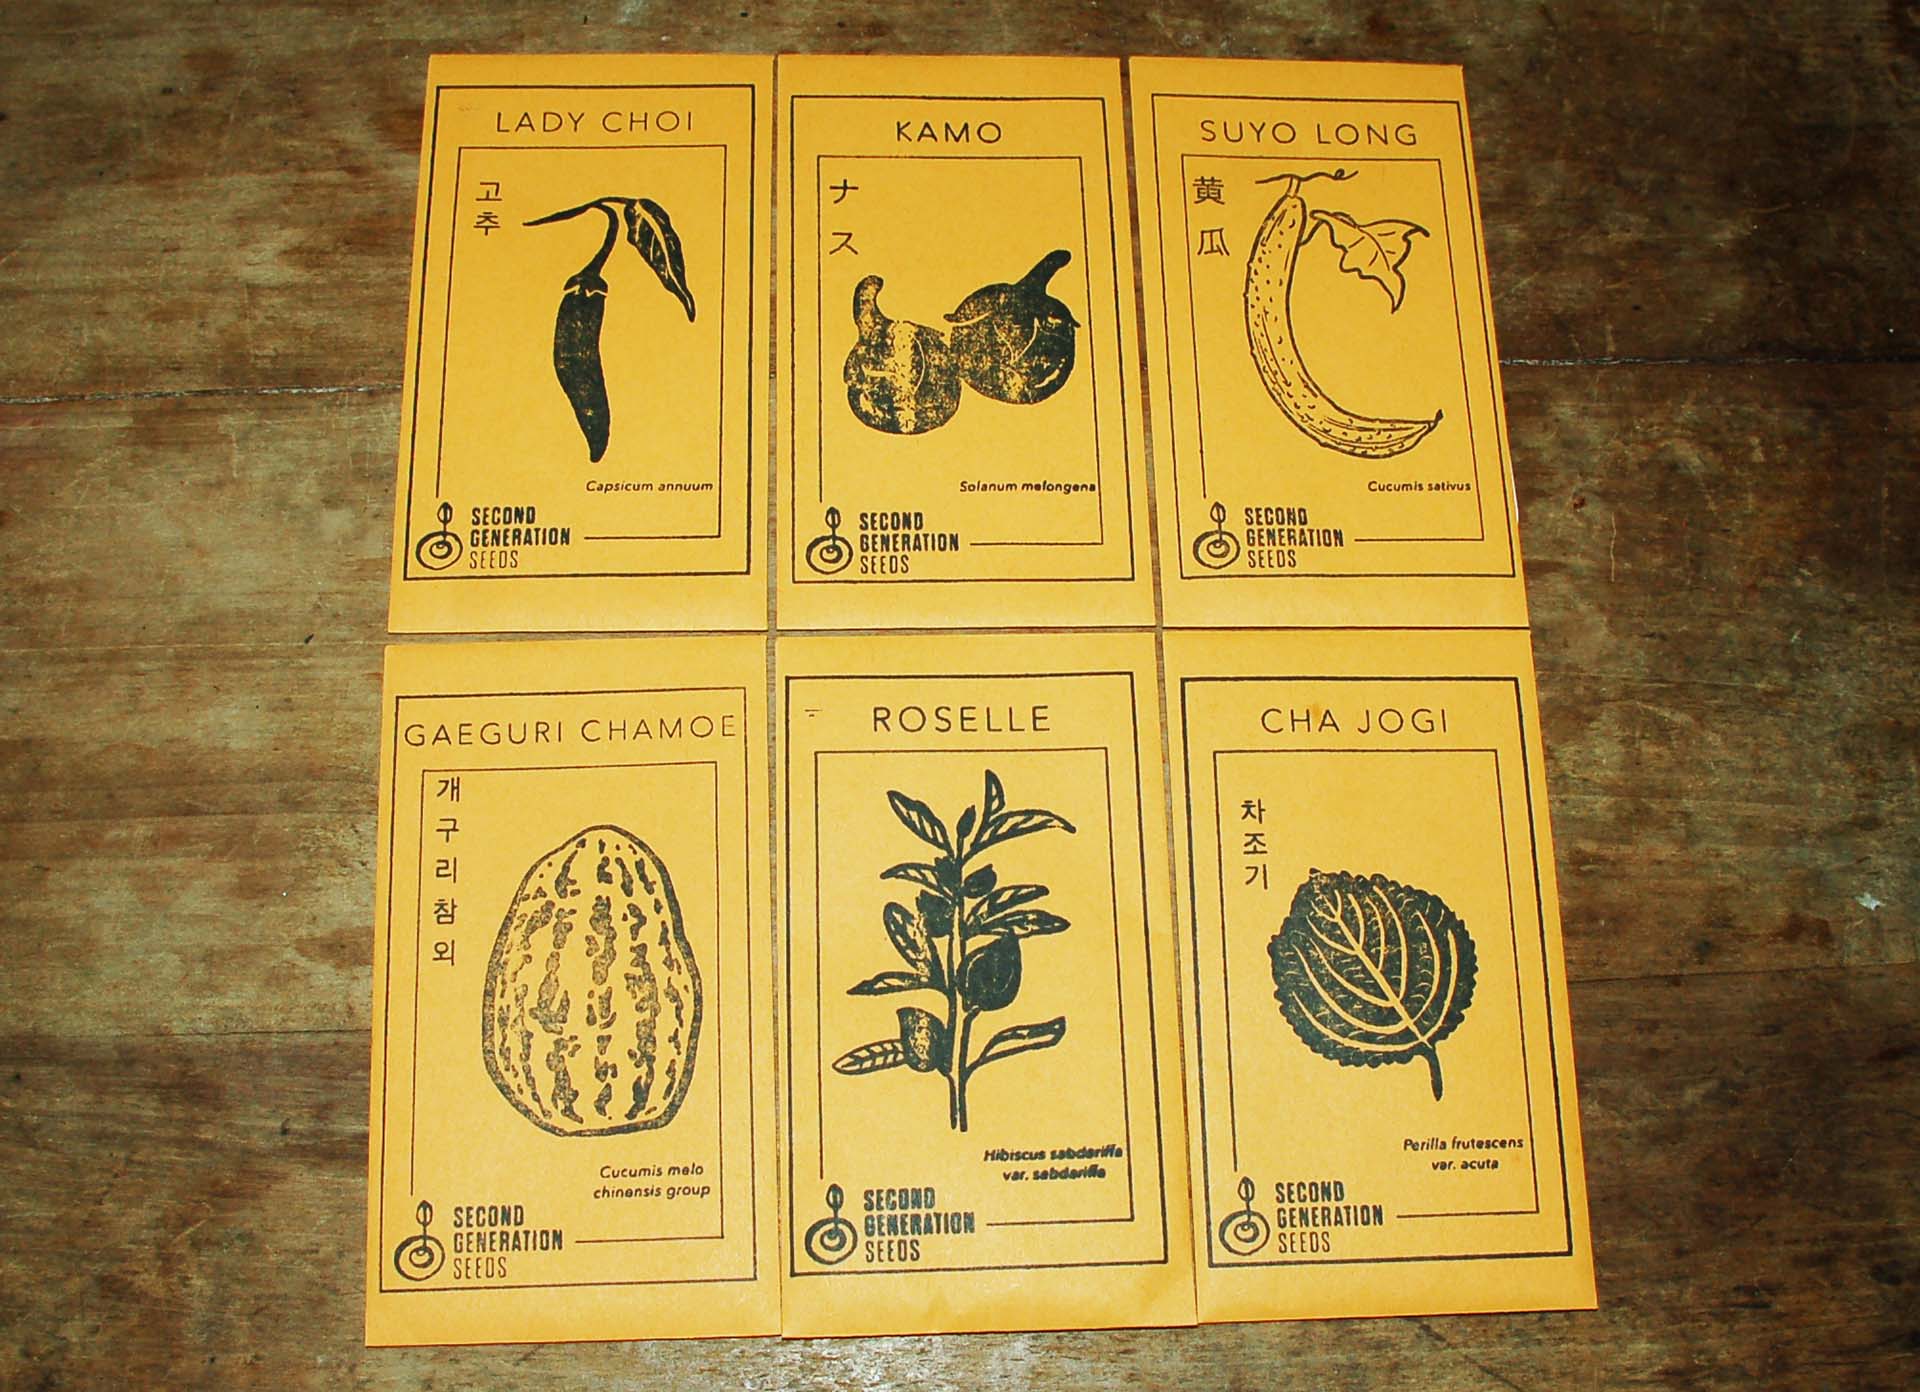 Packets of Asian vegetable seeds decorated with illustrations of each corresponding vegetable: lady choi, kamo, suyo long, gaeguri chamoe, roselle and cha jogi.